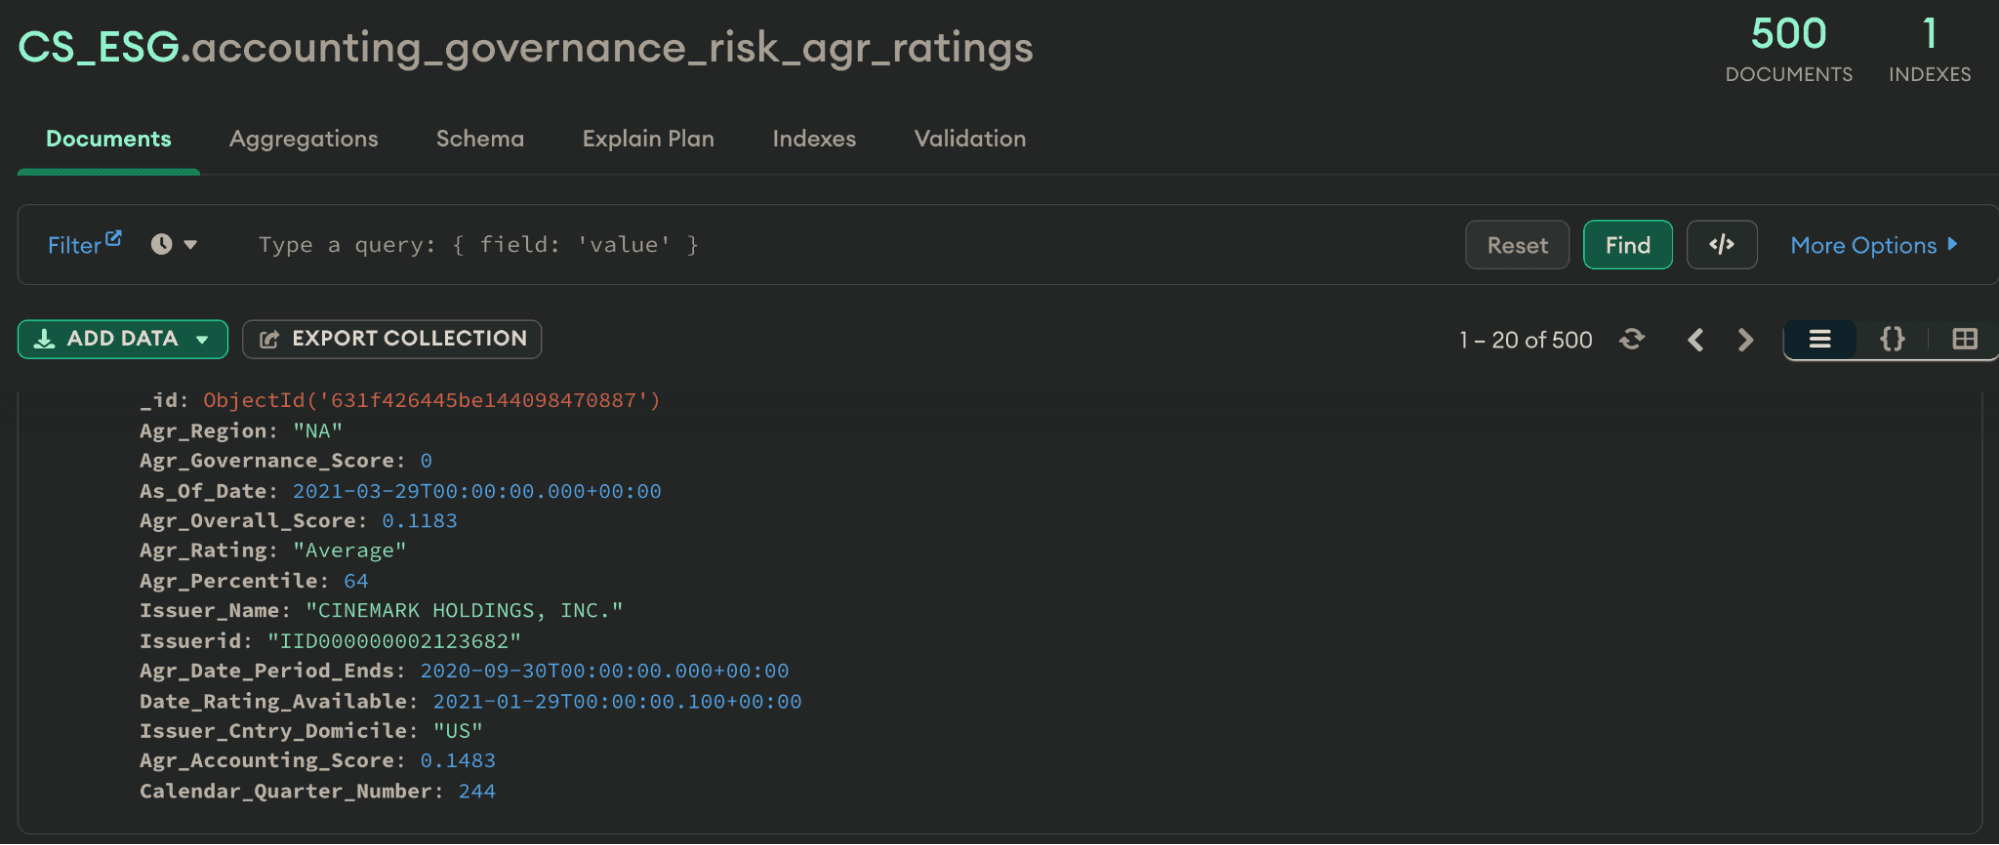 accounting_governance_risk_agr_ratings collection in MongoDB Compass